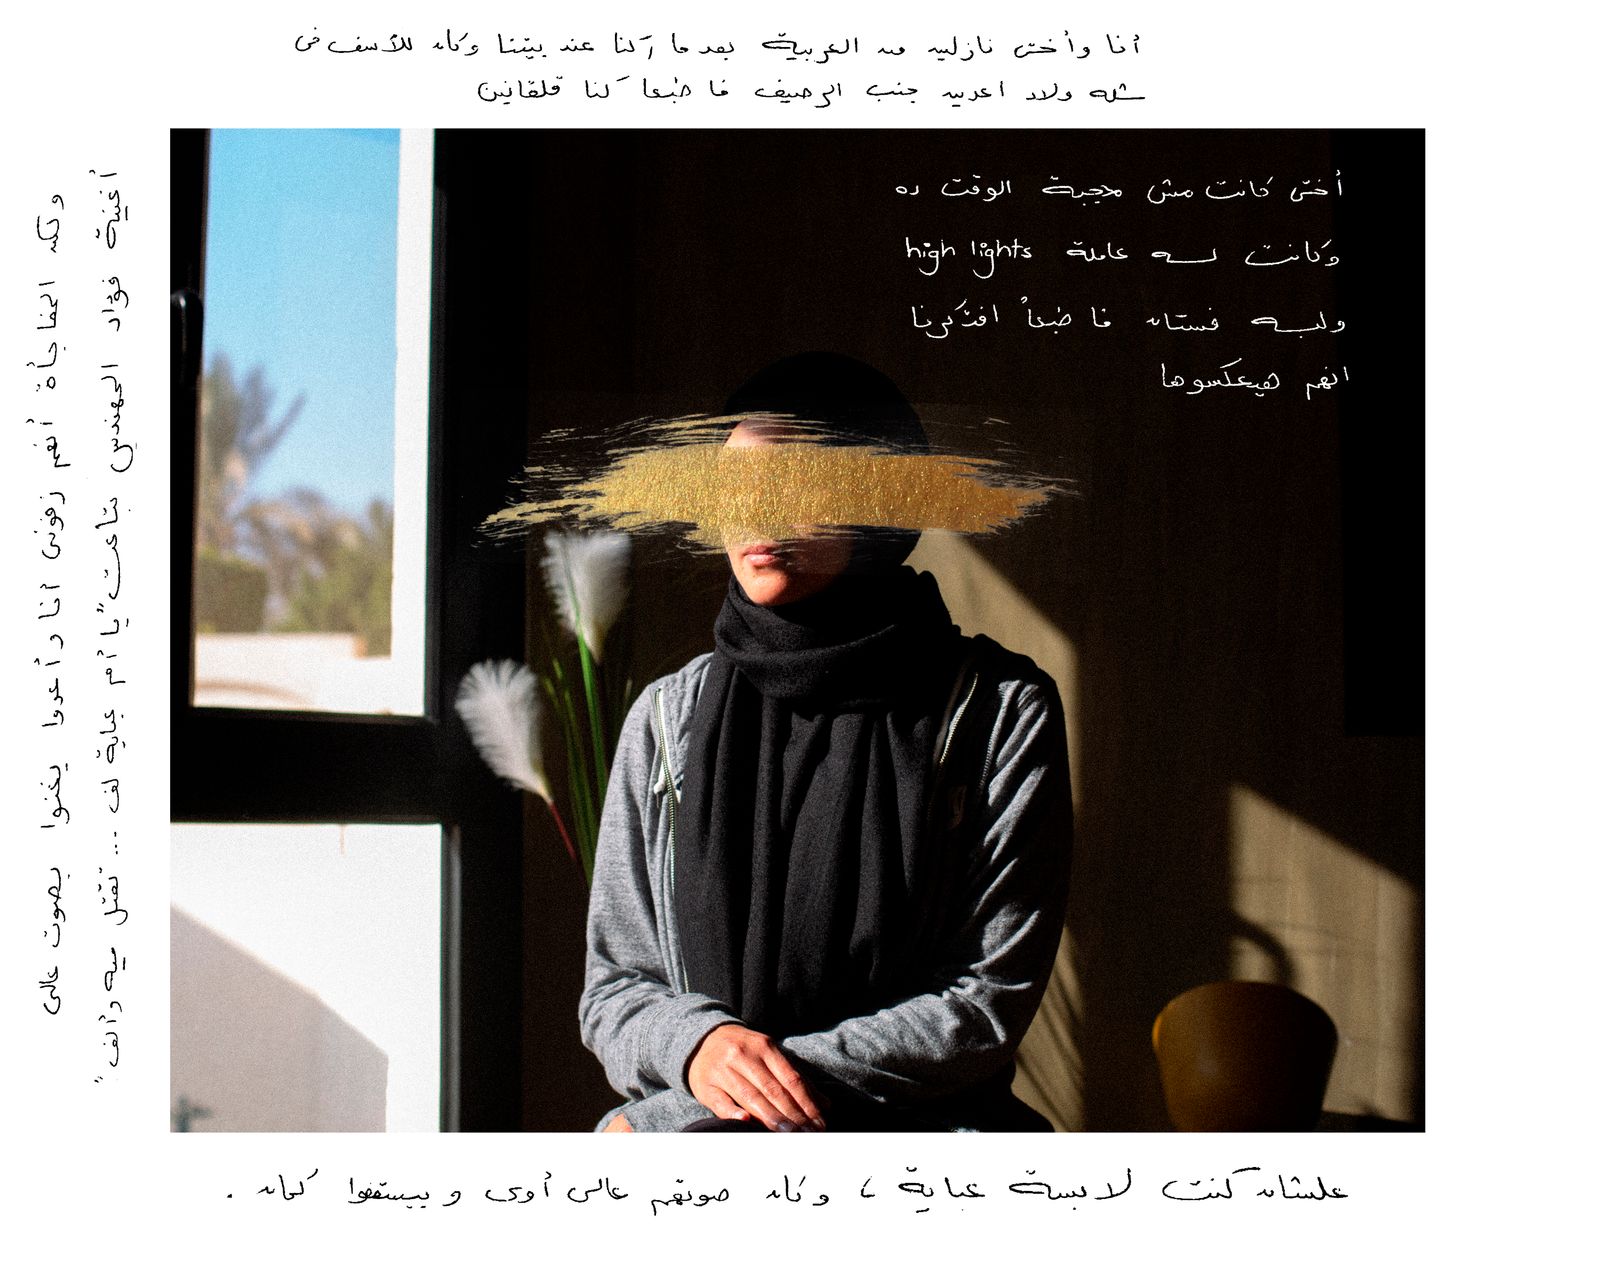 © Lina Geoushy - Image from the Shame Less مش عيب photography project